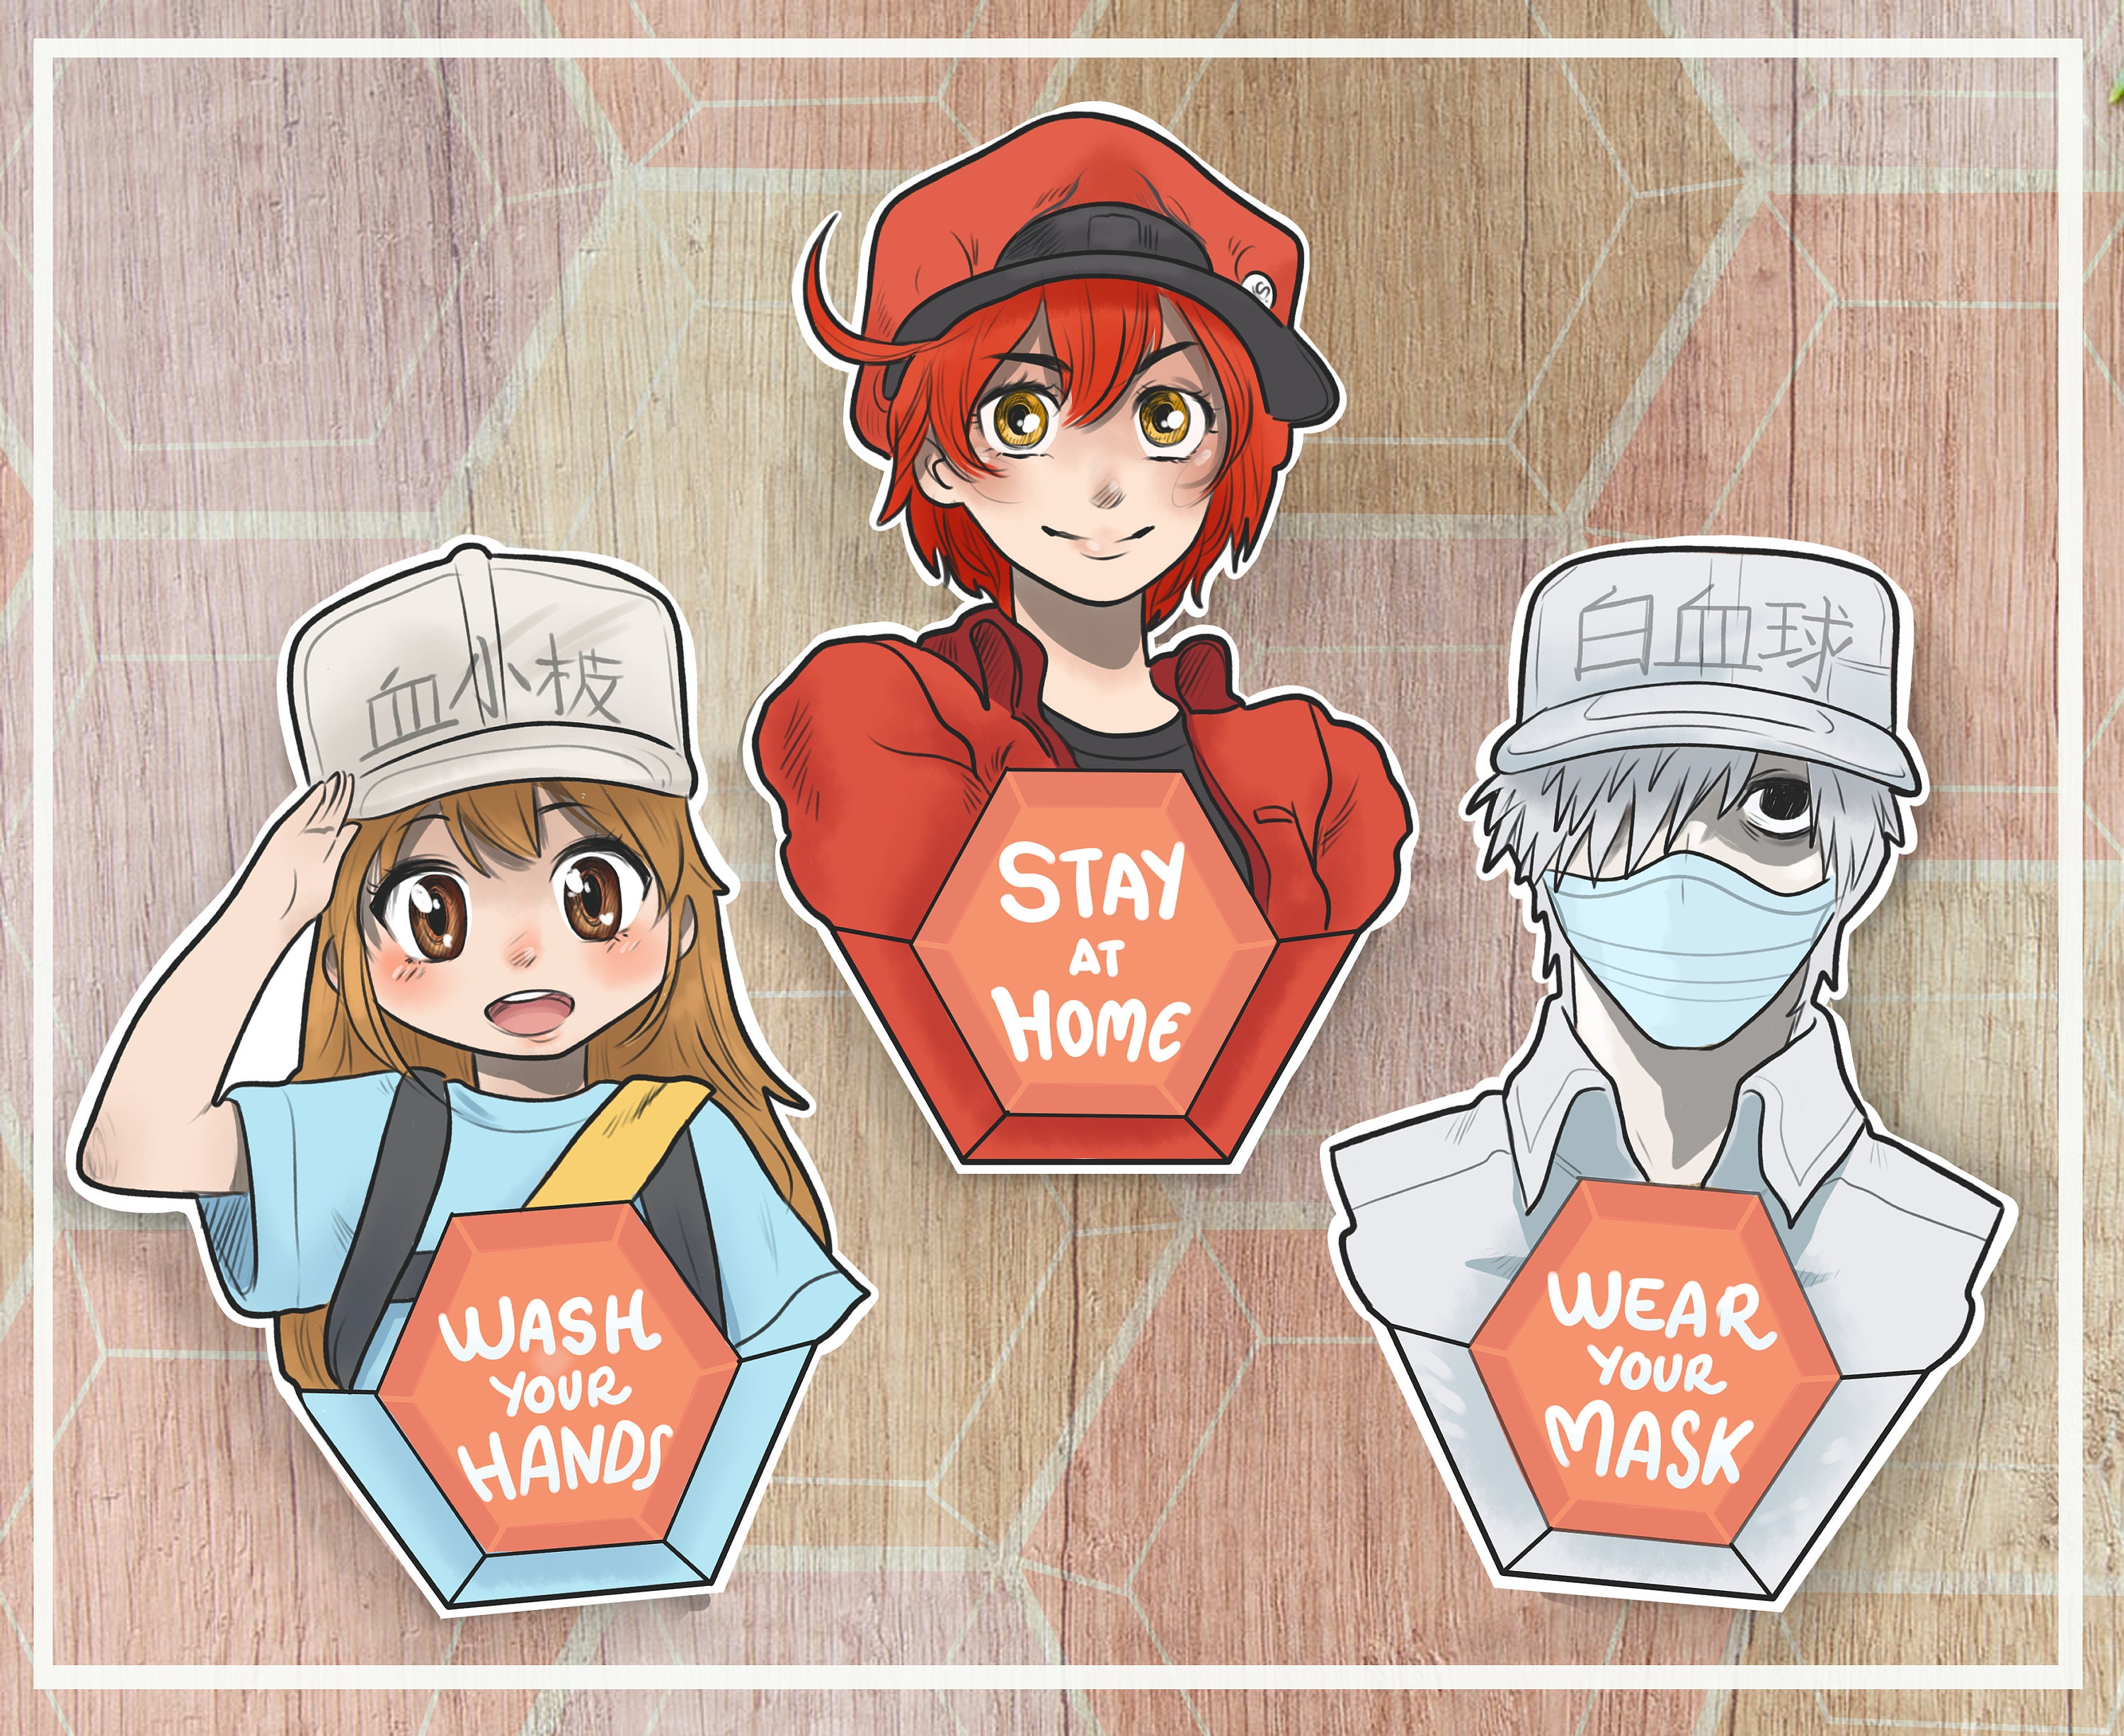 Cells at Work Theatrical Anime to Run With New Platelet Anime Short   News  Anime News Network